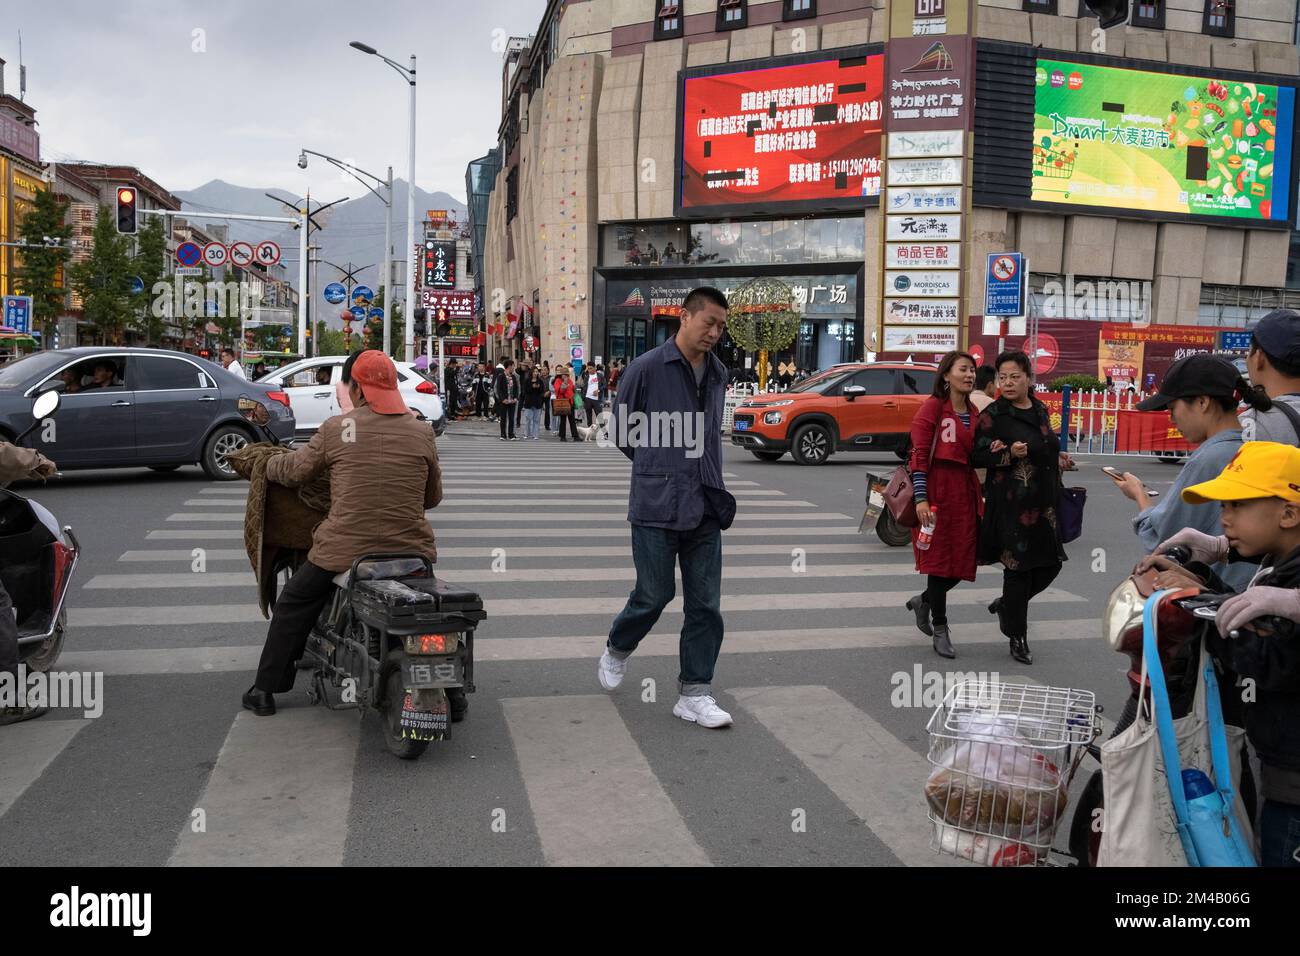 Pedestrians and vehicles at an intersection in the modern part of Lhasa city.  Tibet Autonomous Region. China. Stock Photo